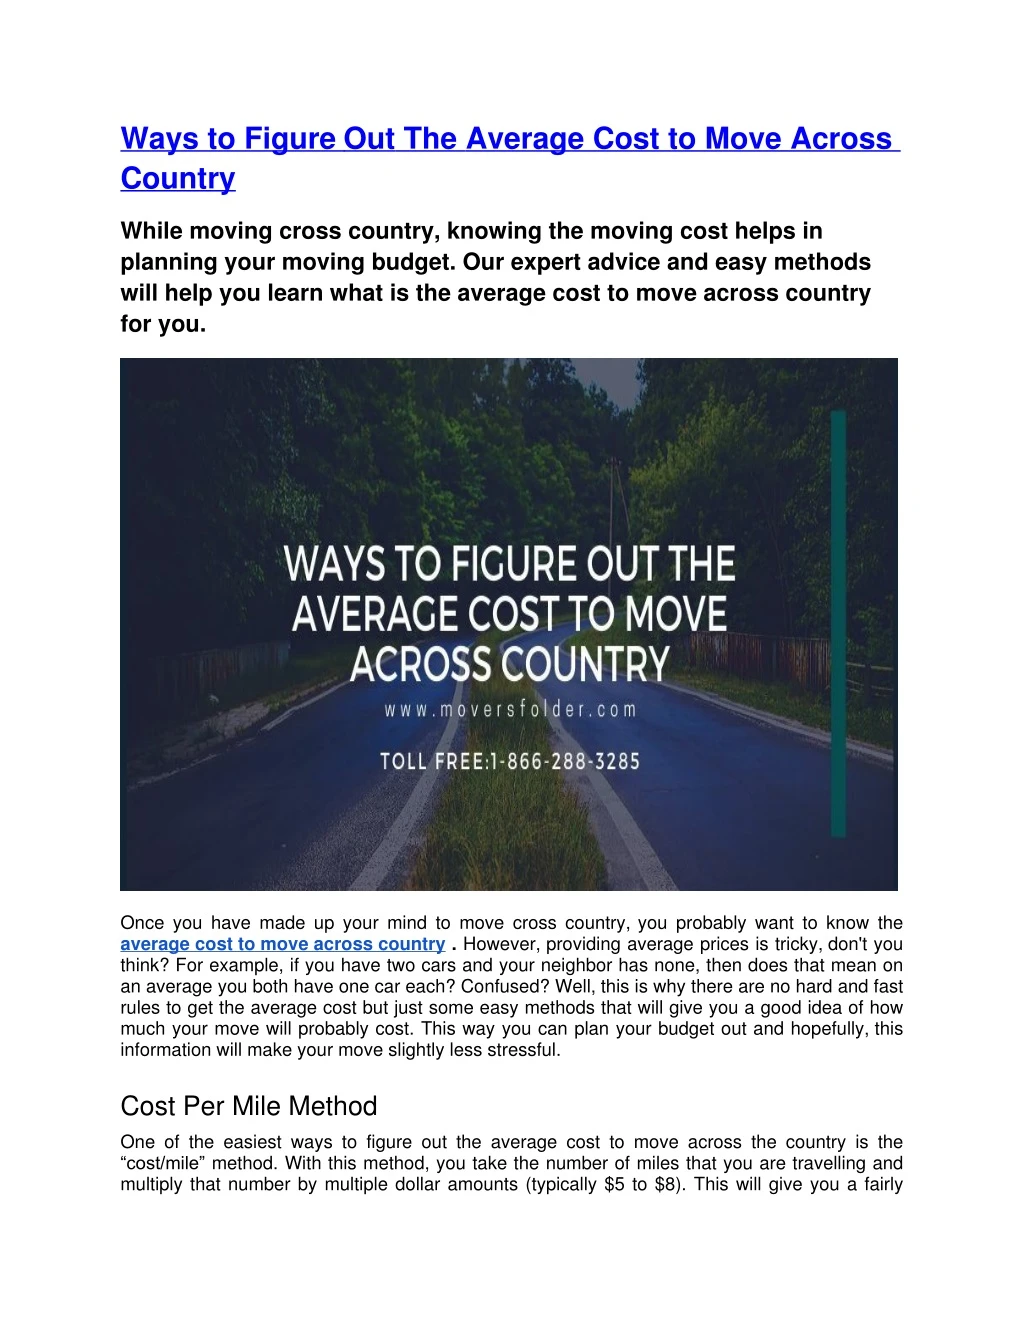 ways to figure out the average cost to move